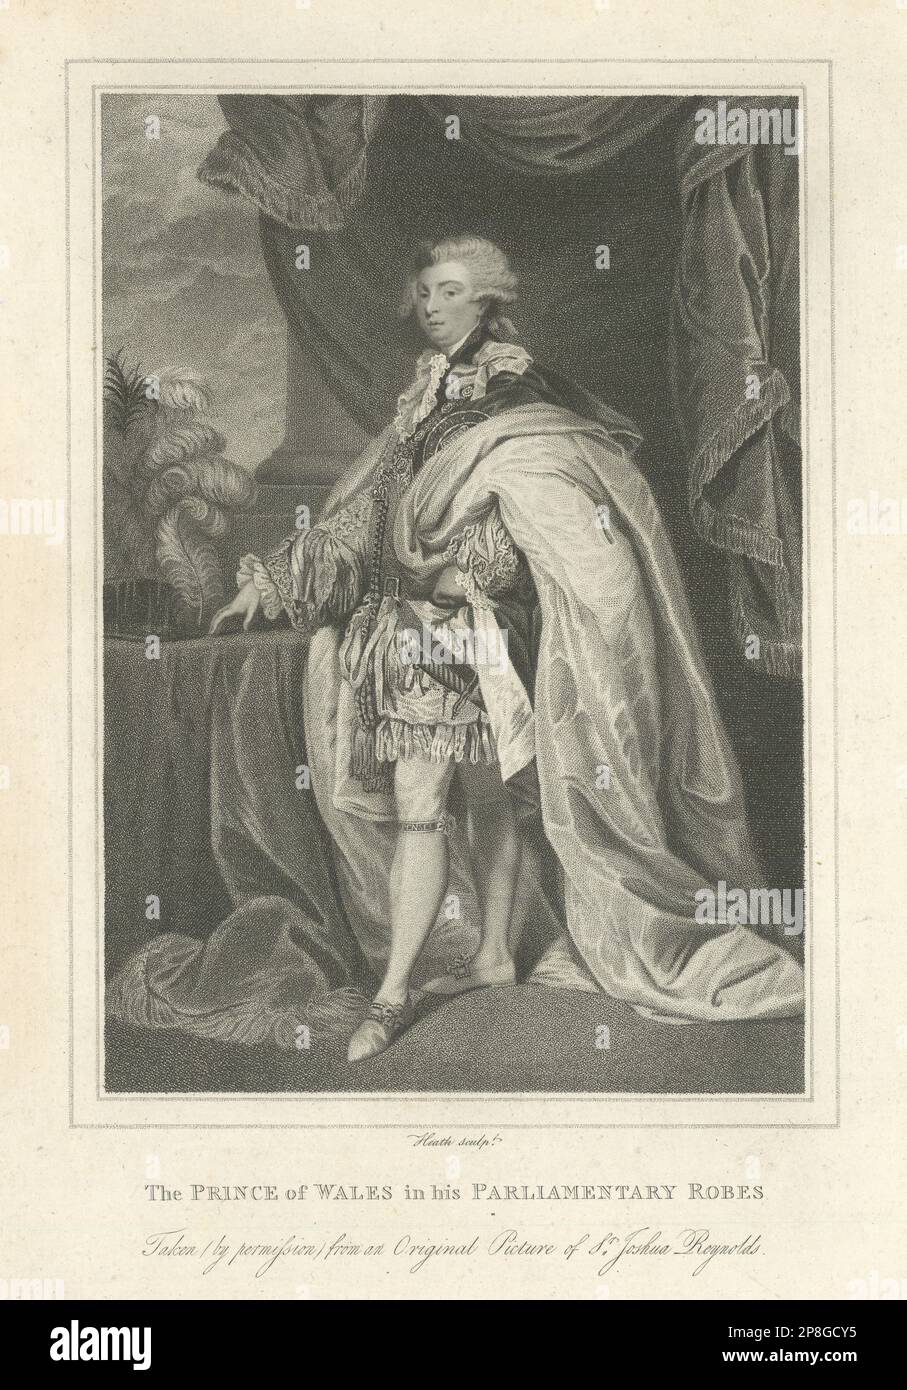 King George IV when Prince of Wales in his Parliamentary Robes. Reynolds 1790 Stock Photo